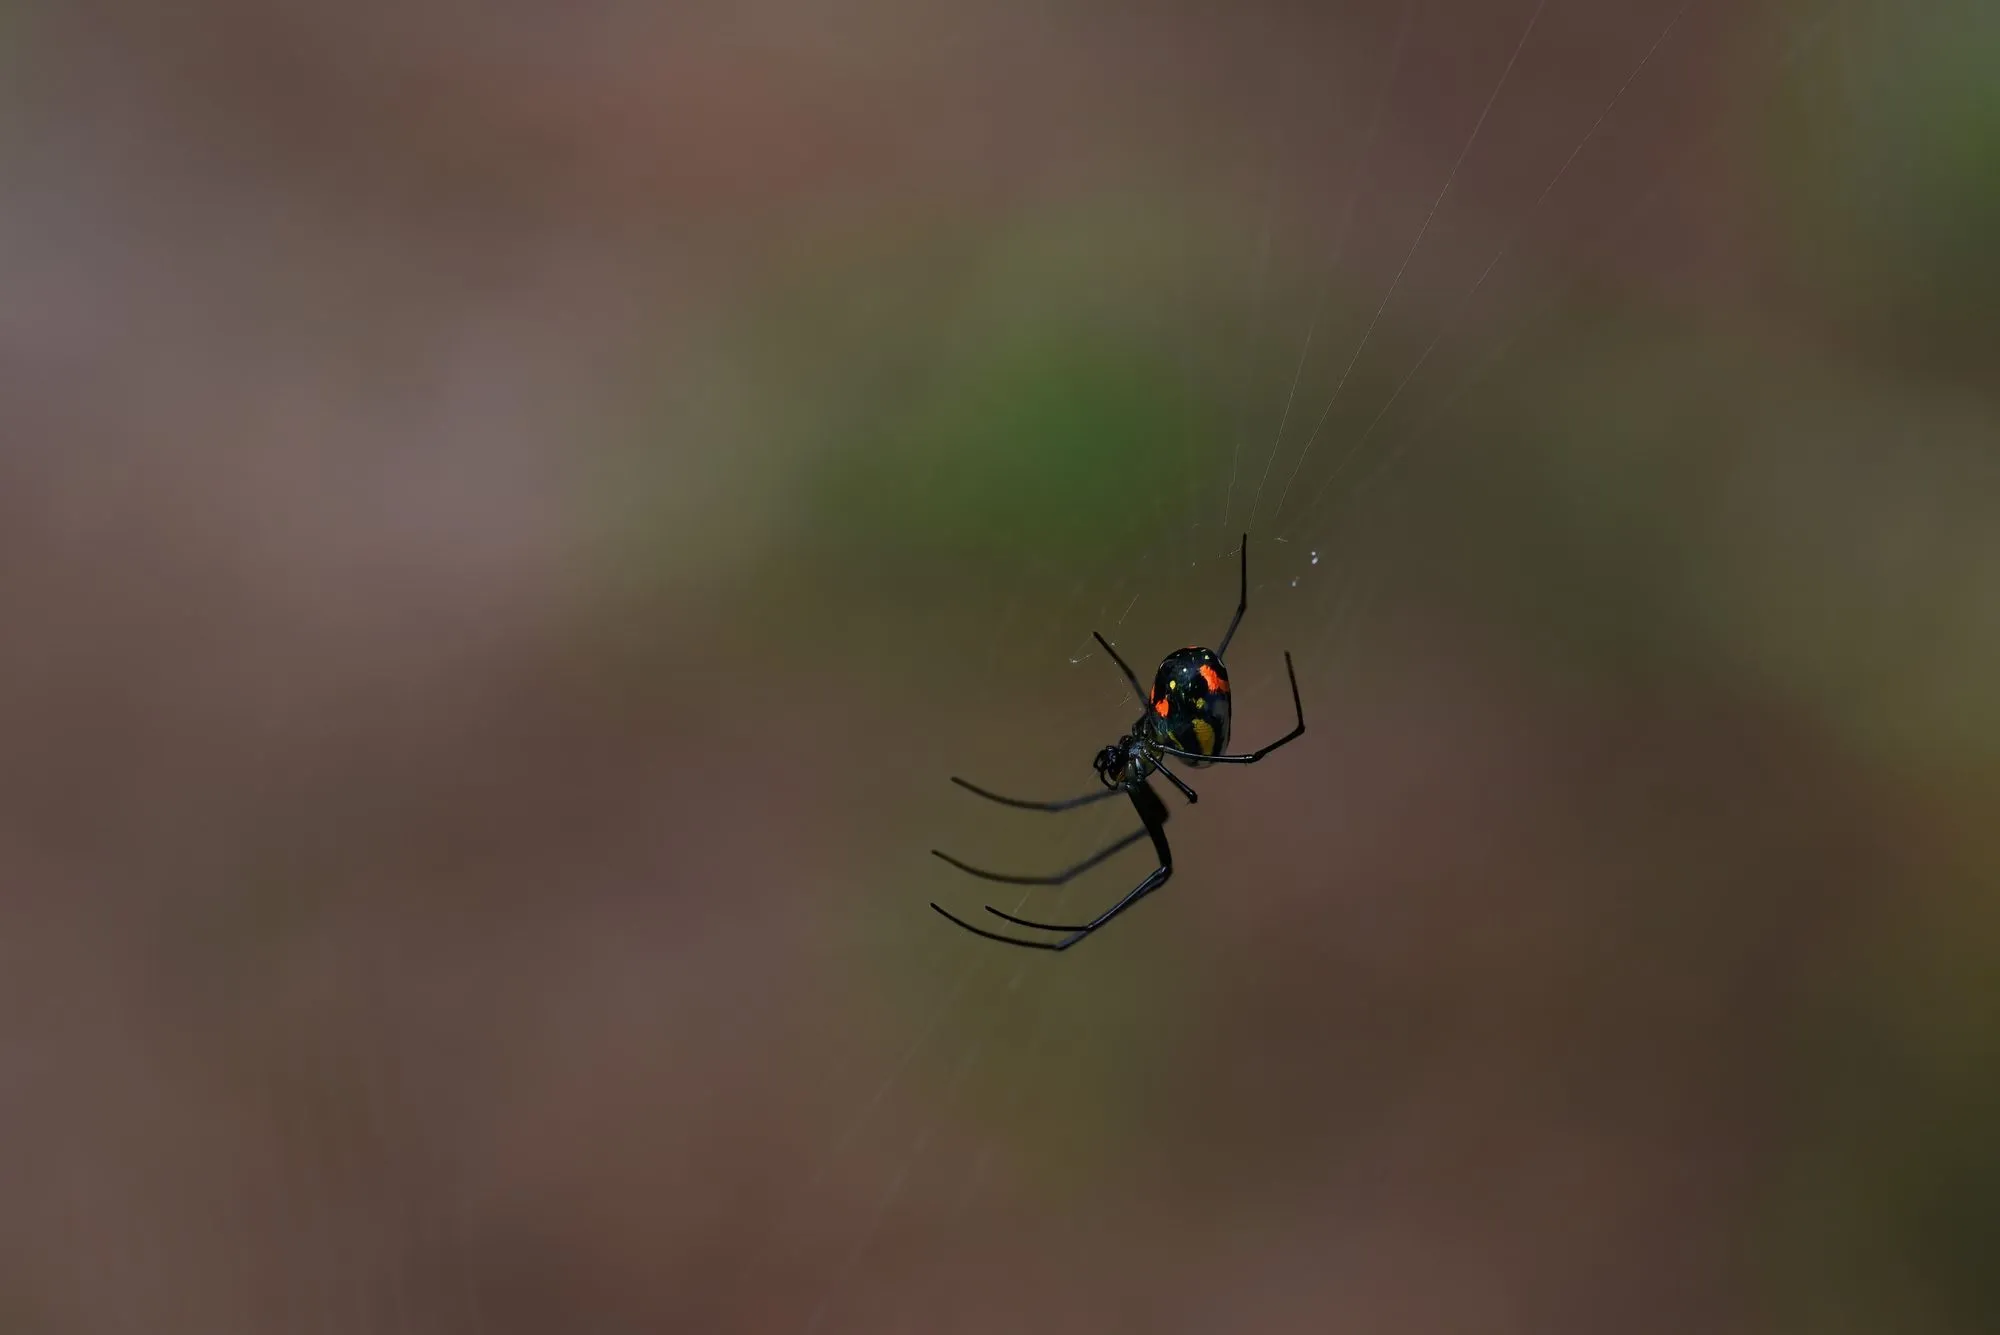 Facts about spiders and their living habits are great to know and fascinating for kids!